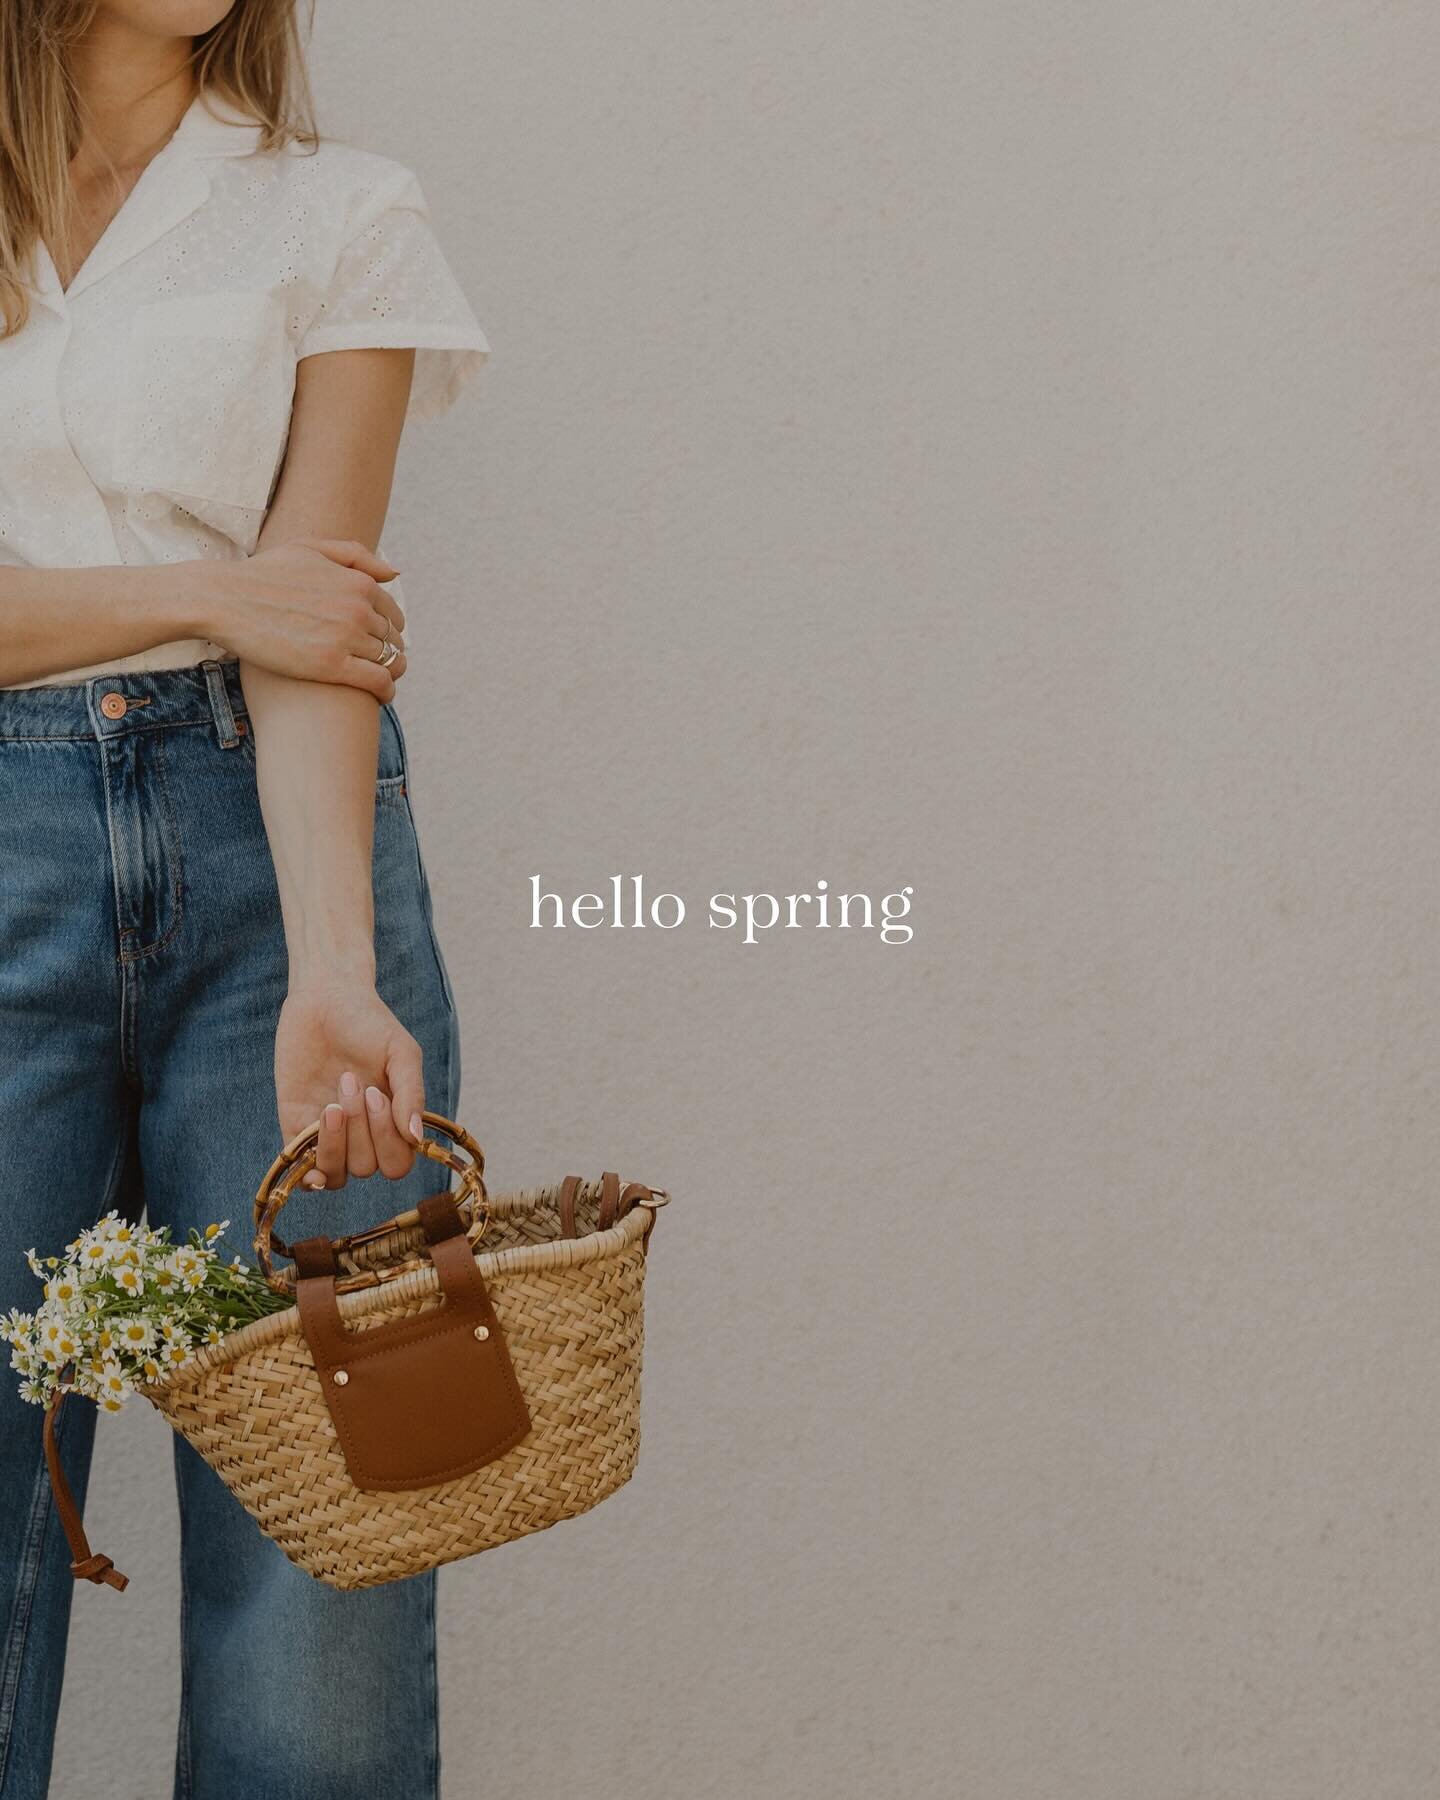 first day of spring feelings ⁠🌸🌱🌼
⁠